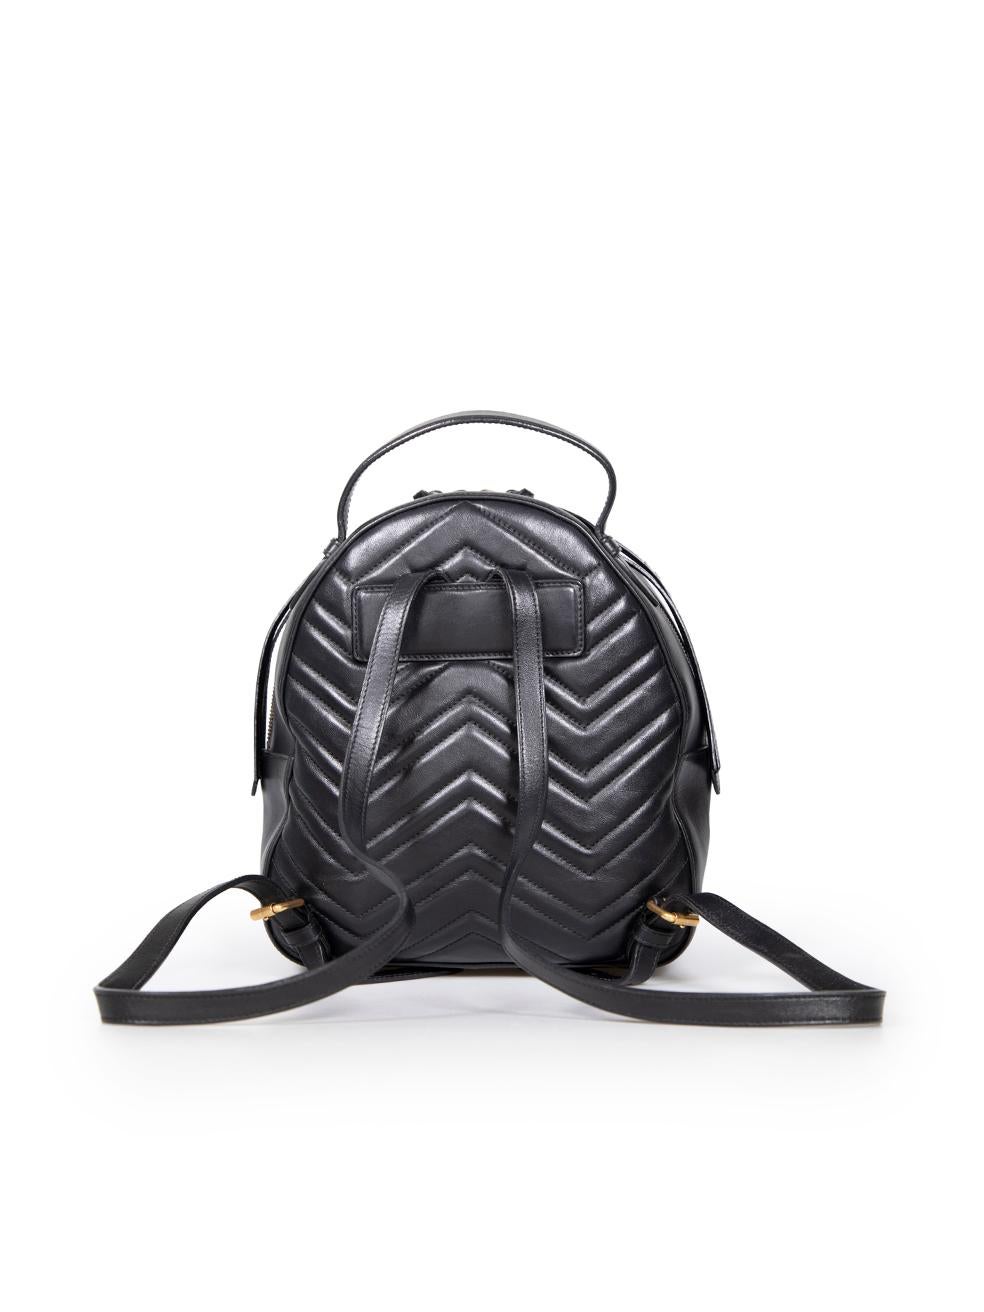 Gucci Black Leather GG Marmont Matelass Backpack In Excellent Condition For Sale In London, GB